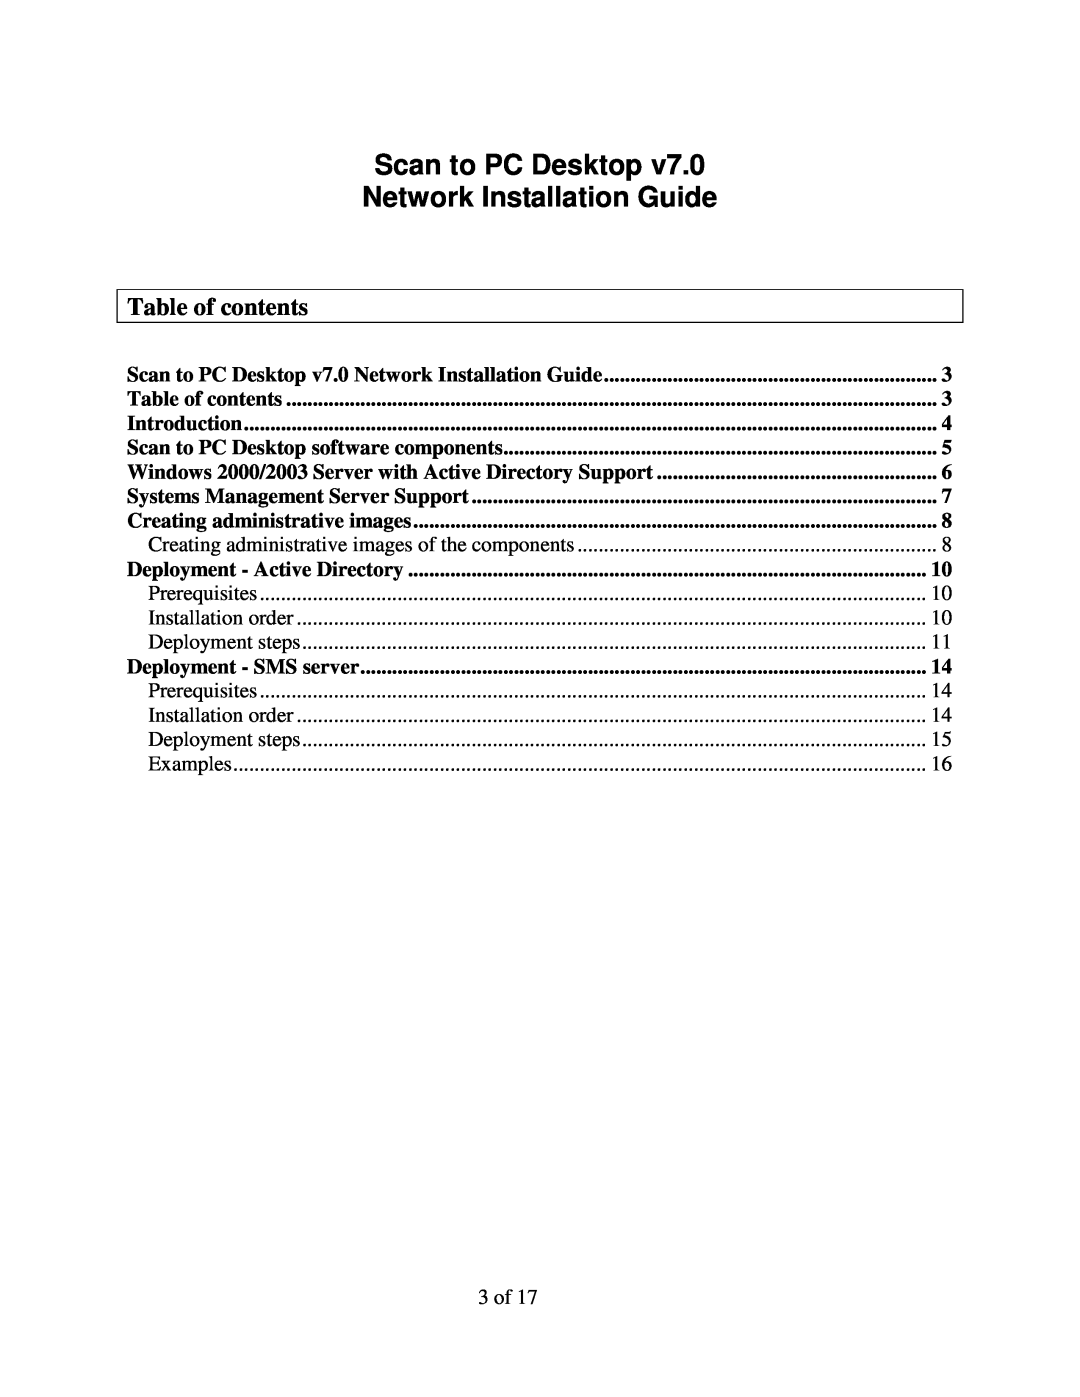 Xerox 098S04703 manual Table of contents, Scan to PC Desktop Network Installation Guide 